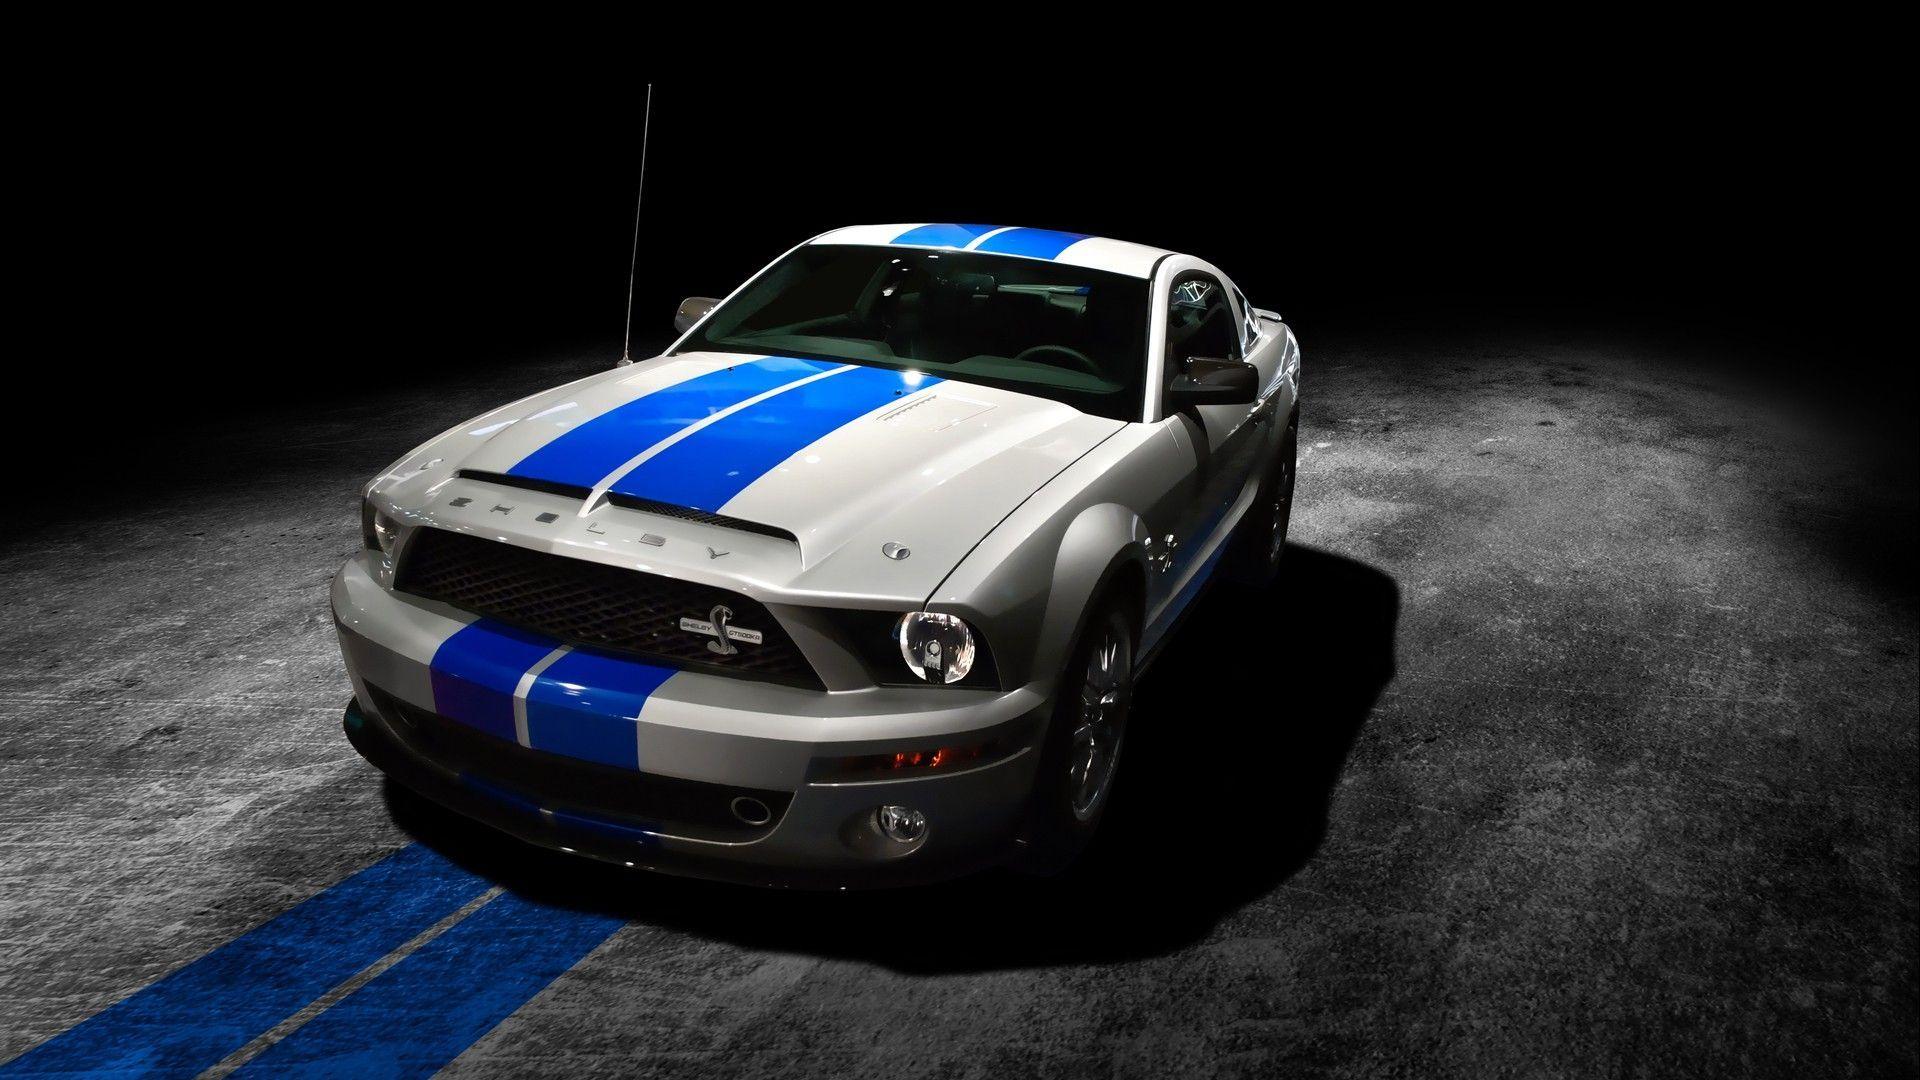 Free HD Car Wallpaper 1920x1080 Background On Pc